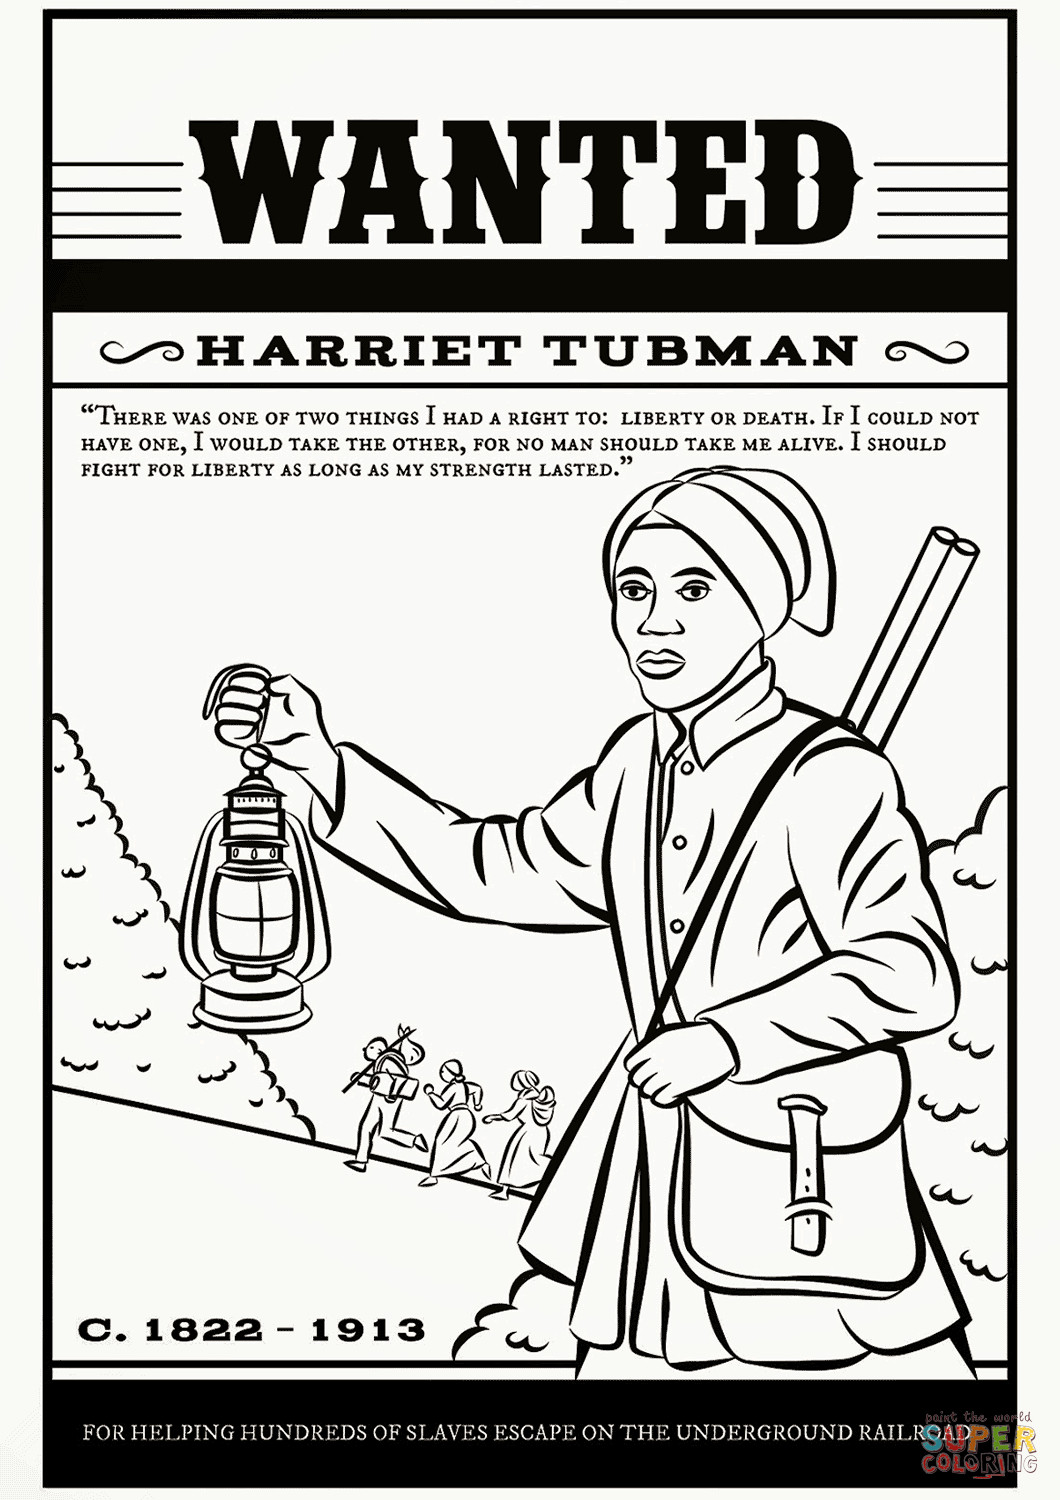 Harriet Tubman Free Coloring Sheets
 Harriet Tubman coloring page